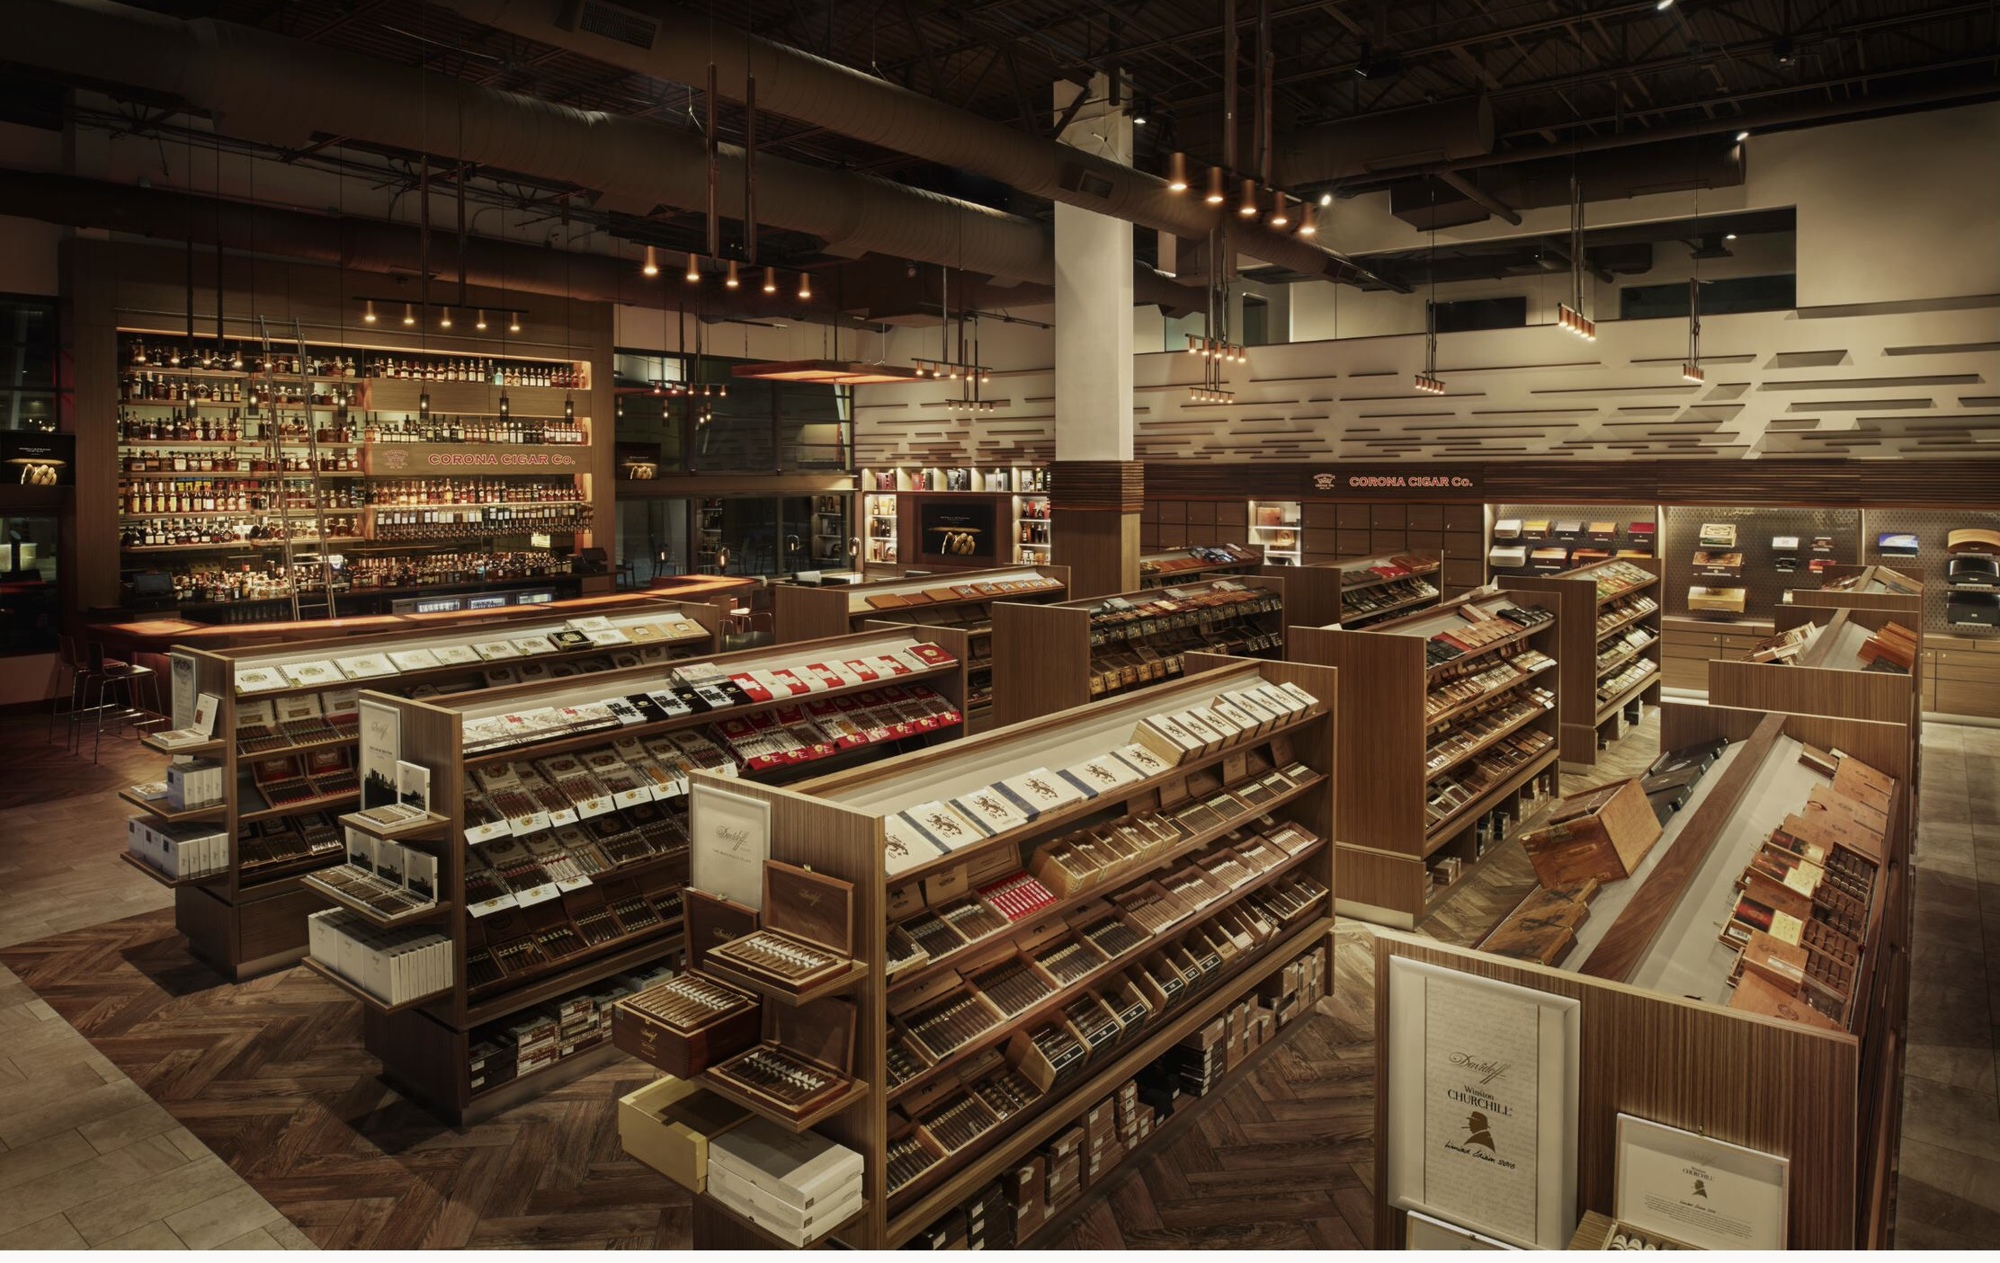 Jeff Borysiewicz said his shops derive the majority of their revenue from retail sales, but the presence of a bar and late-night hours drew concern from some downtown residents. (Image courtesy Corona Cigar Co.)